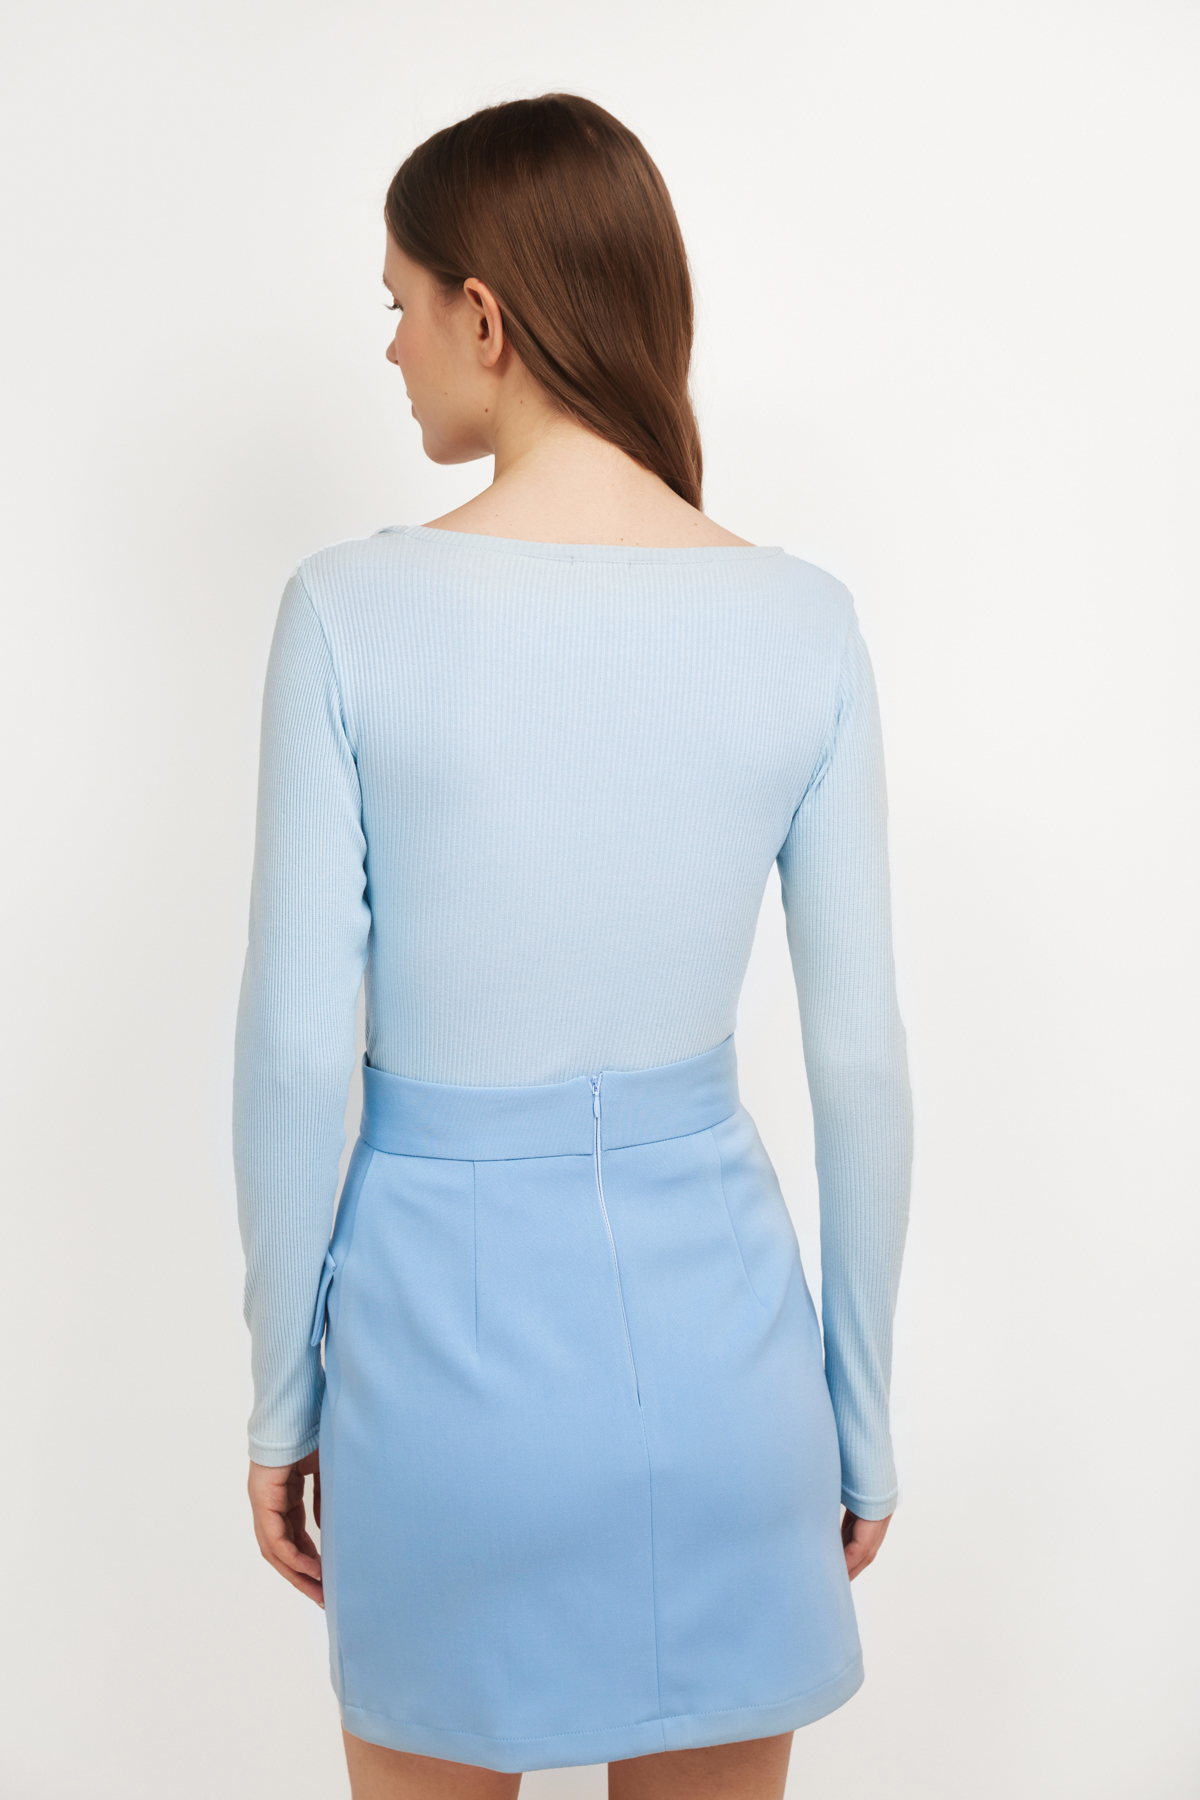 Blue sweater with square neckline, photo 4